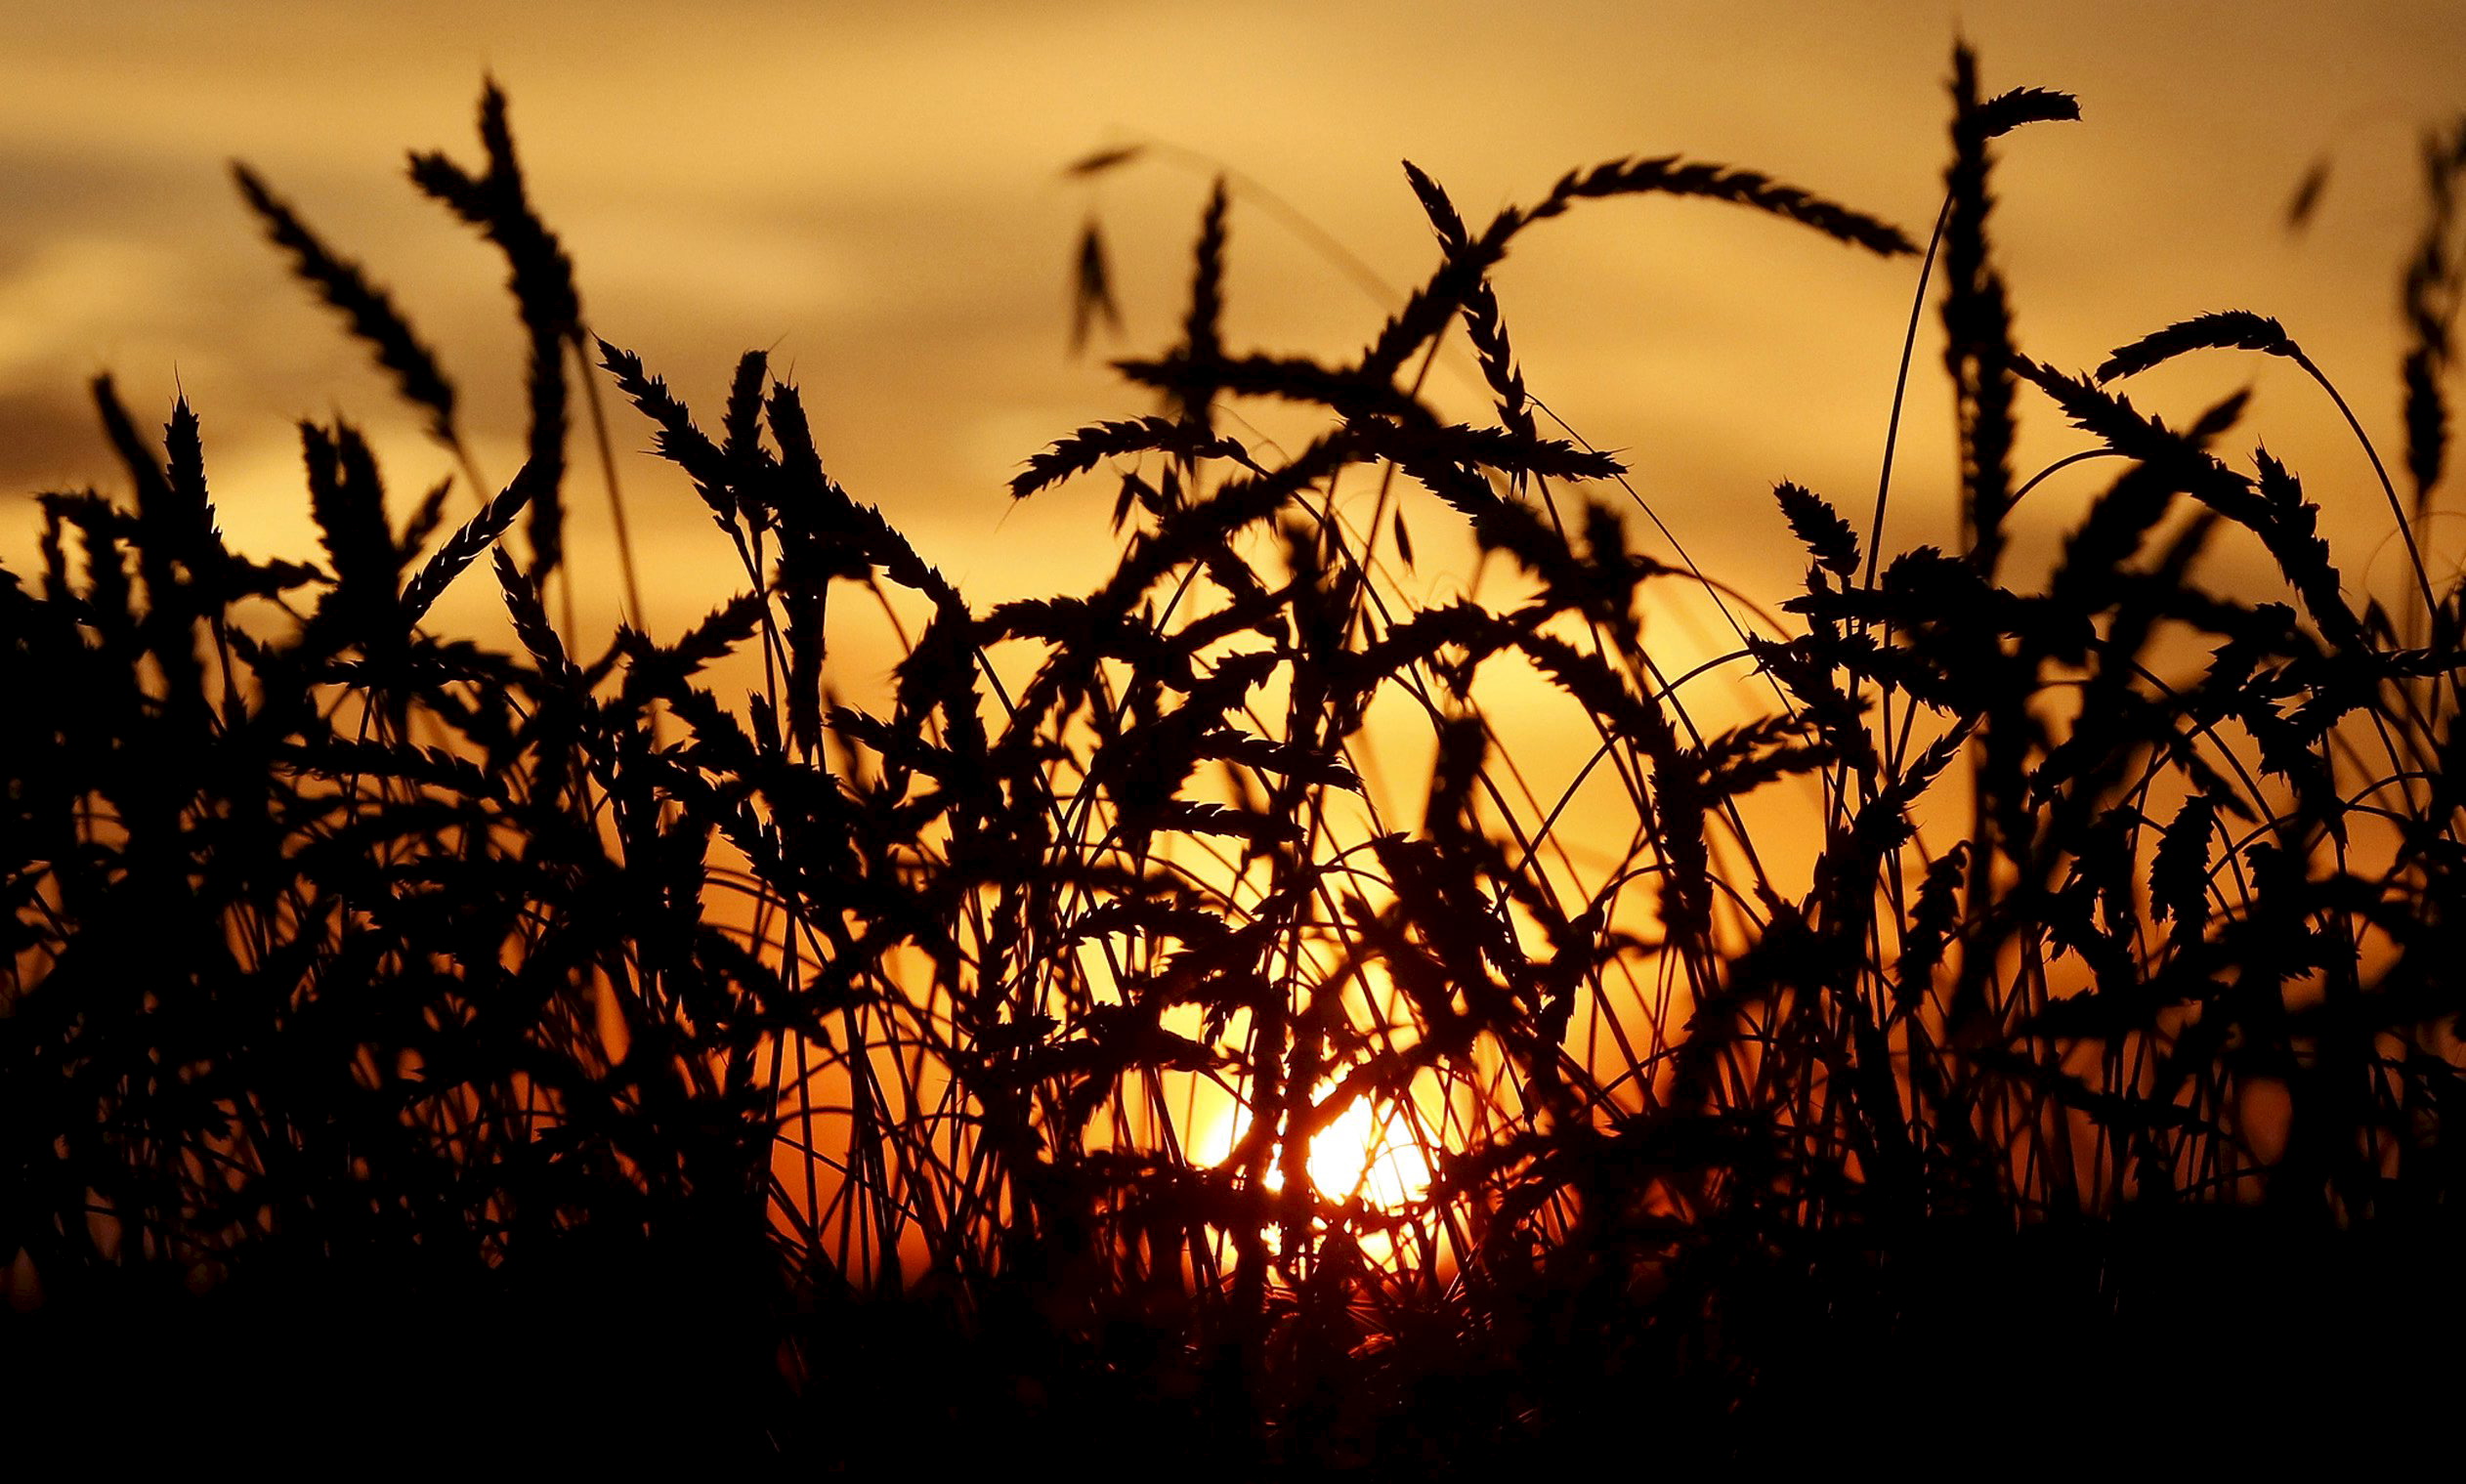 Wheat is seen during sunset in a field of the Solgonskoye farming company in the village of Solgon, Russia, in this September 6, 2014 file photo. REUTERS/Ilya Naymushin/Files